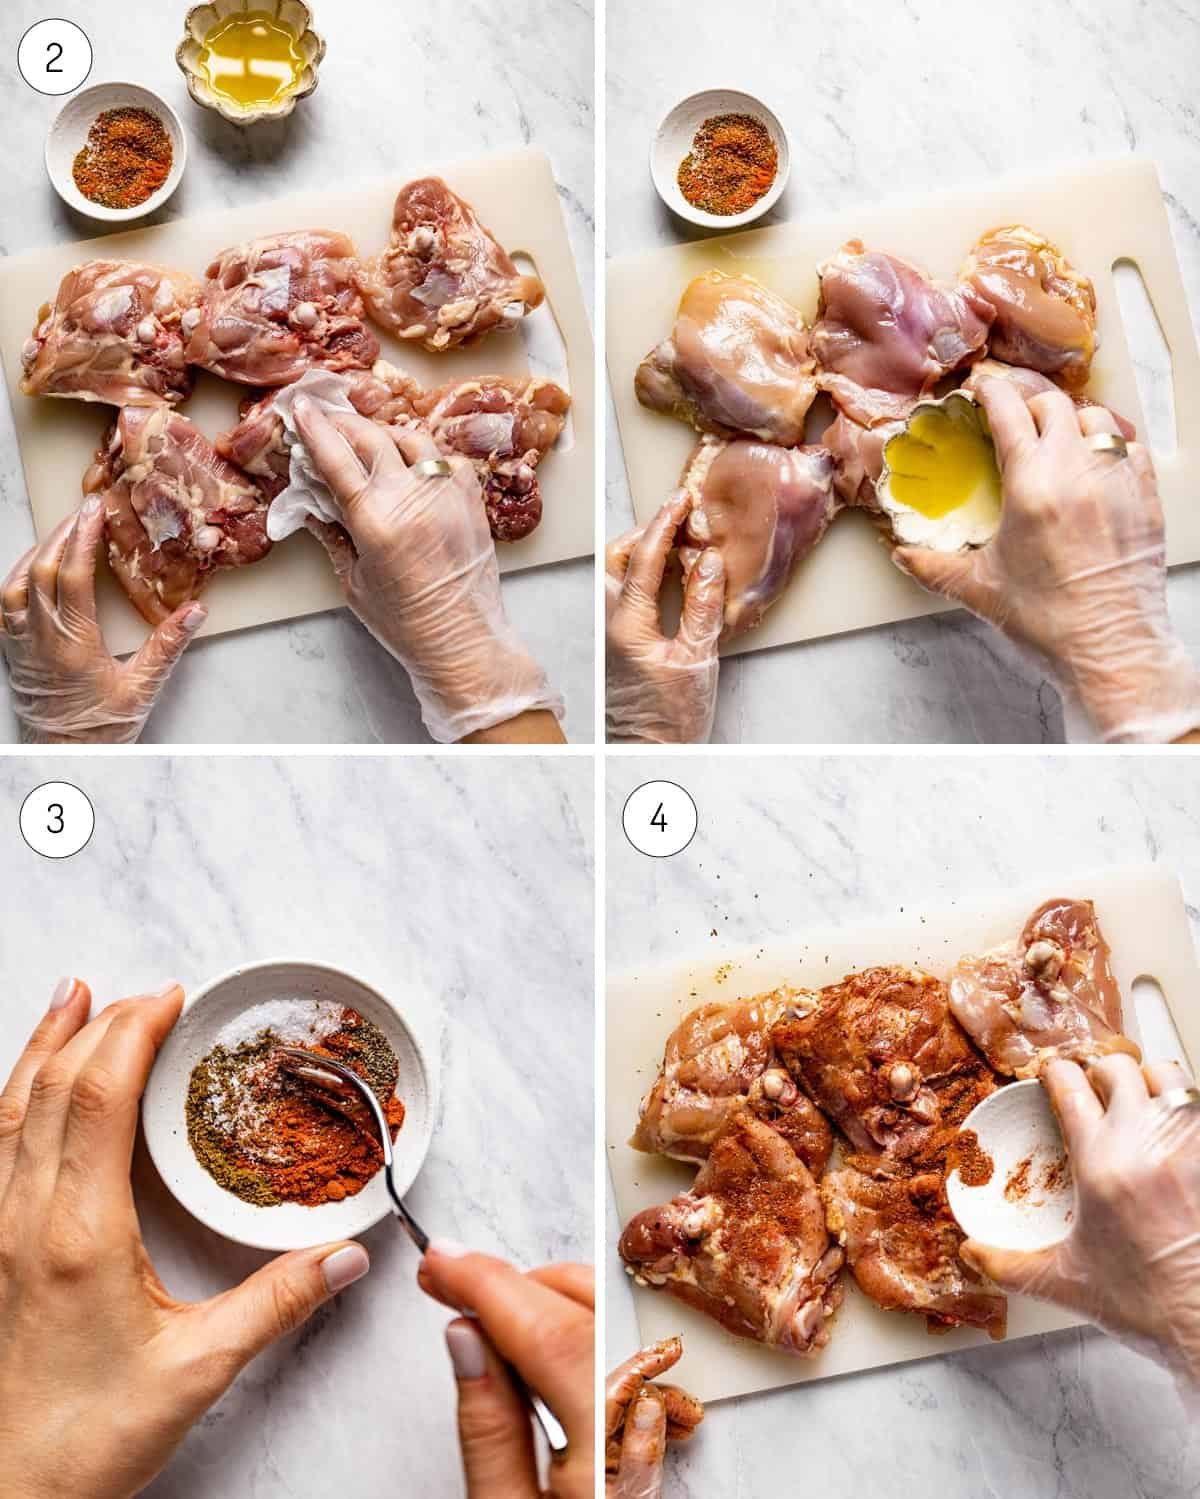 A person showing how to oil and season chicken thighs from the top view.